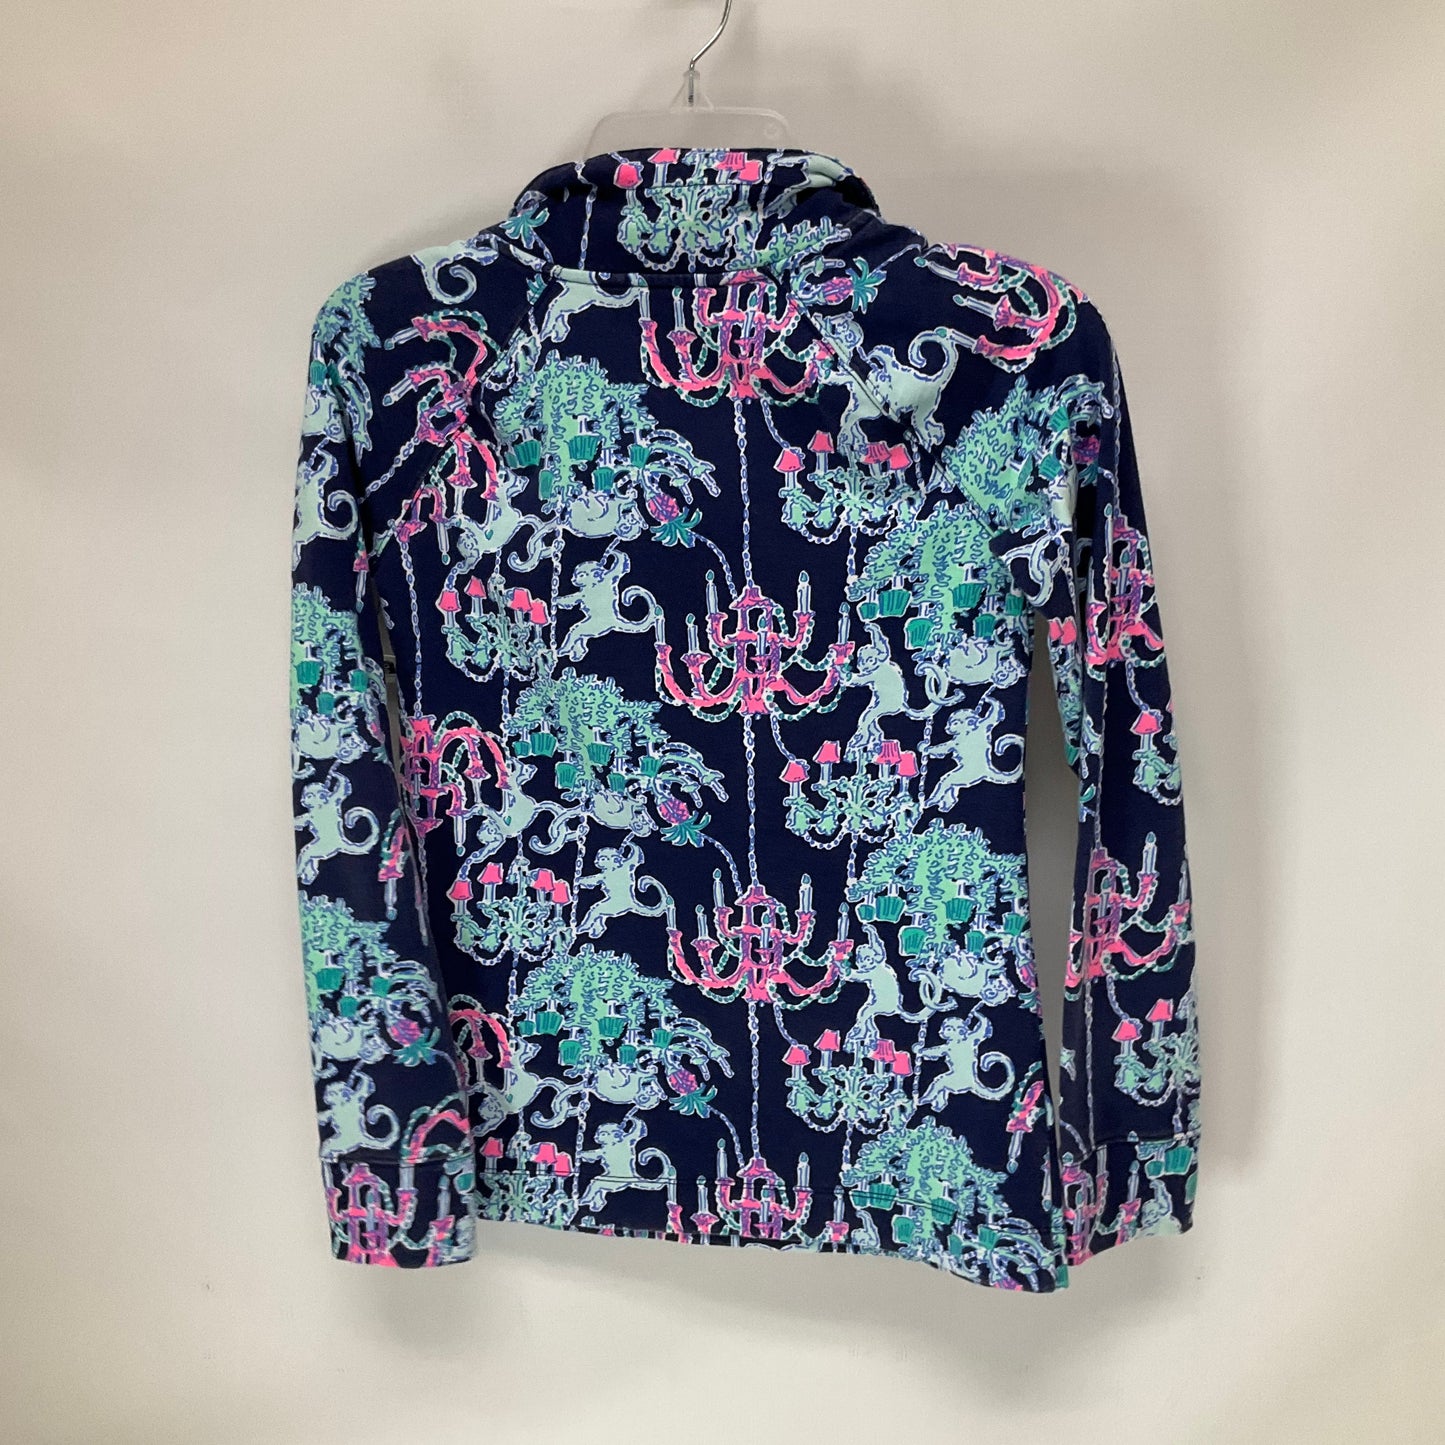 Blue Athletic Top Long Sleeve Collar Lilly Pulitzer, Size Xxs